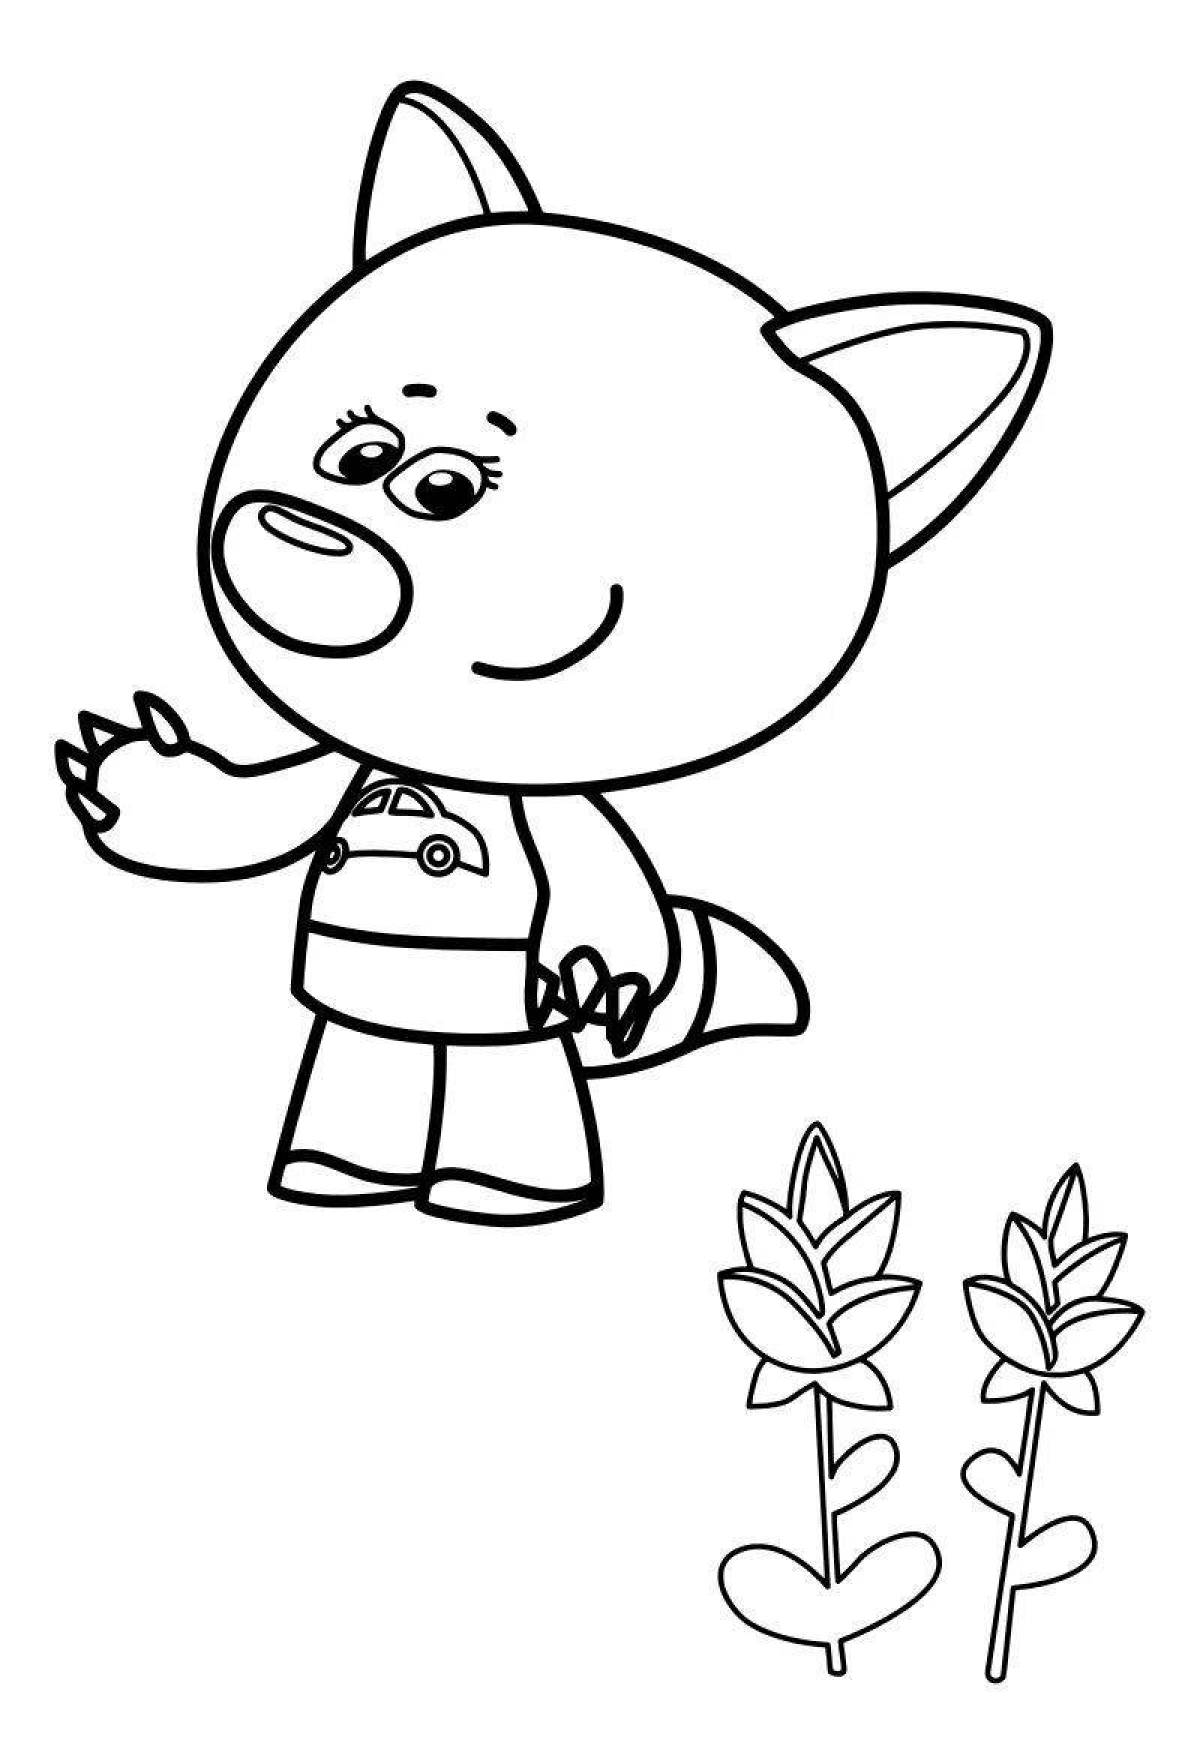 Coloring page sweet cute chick